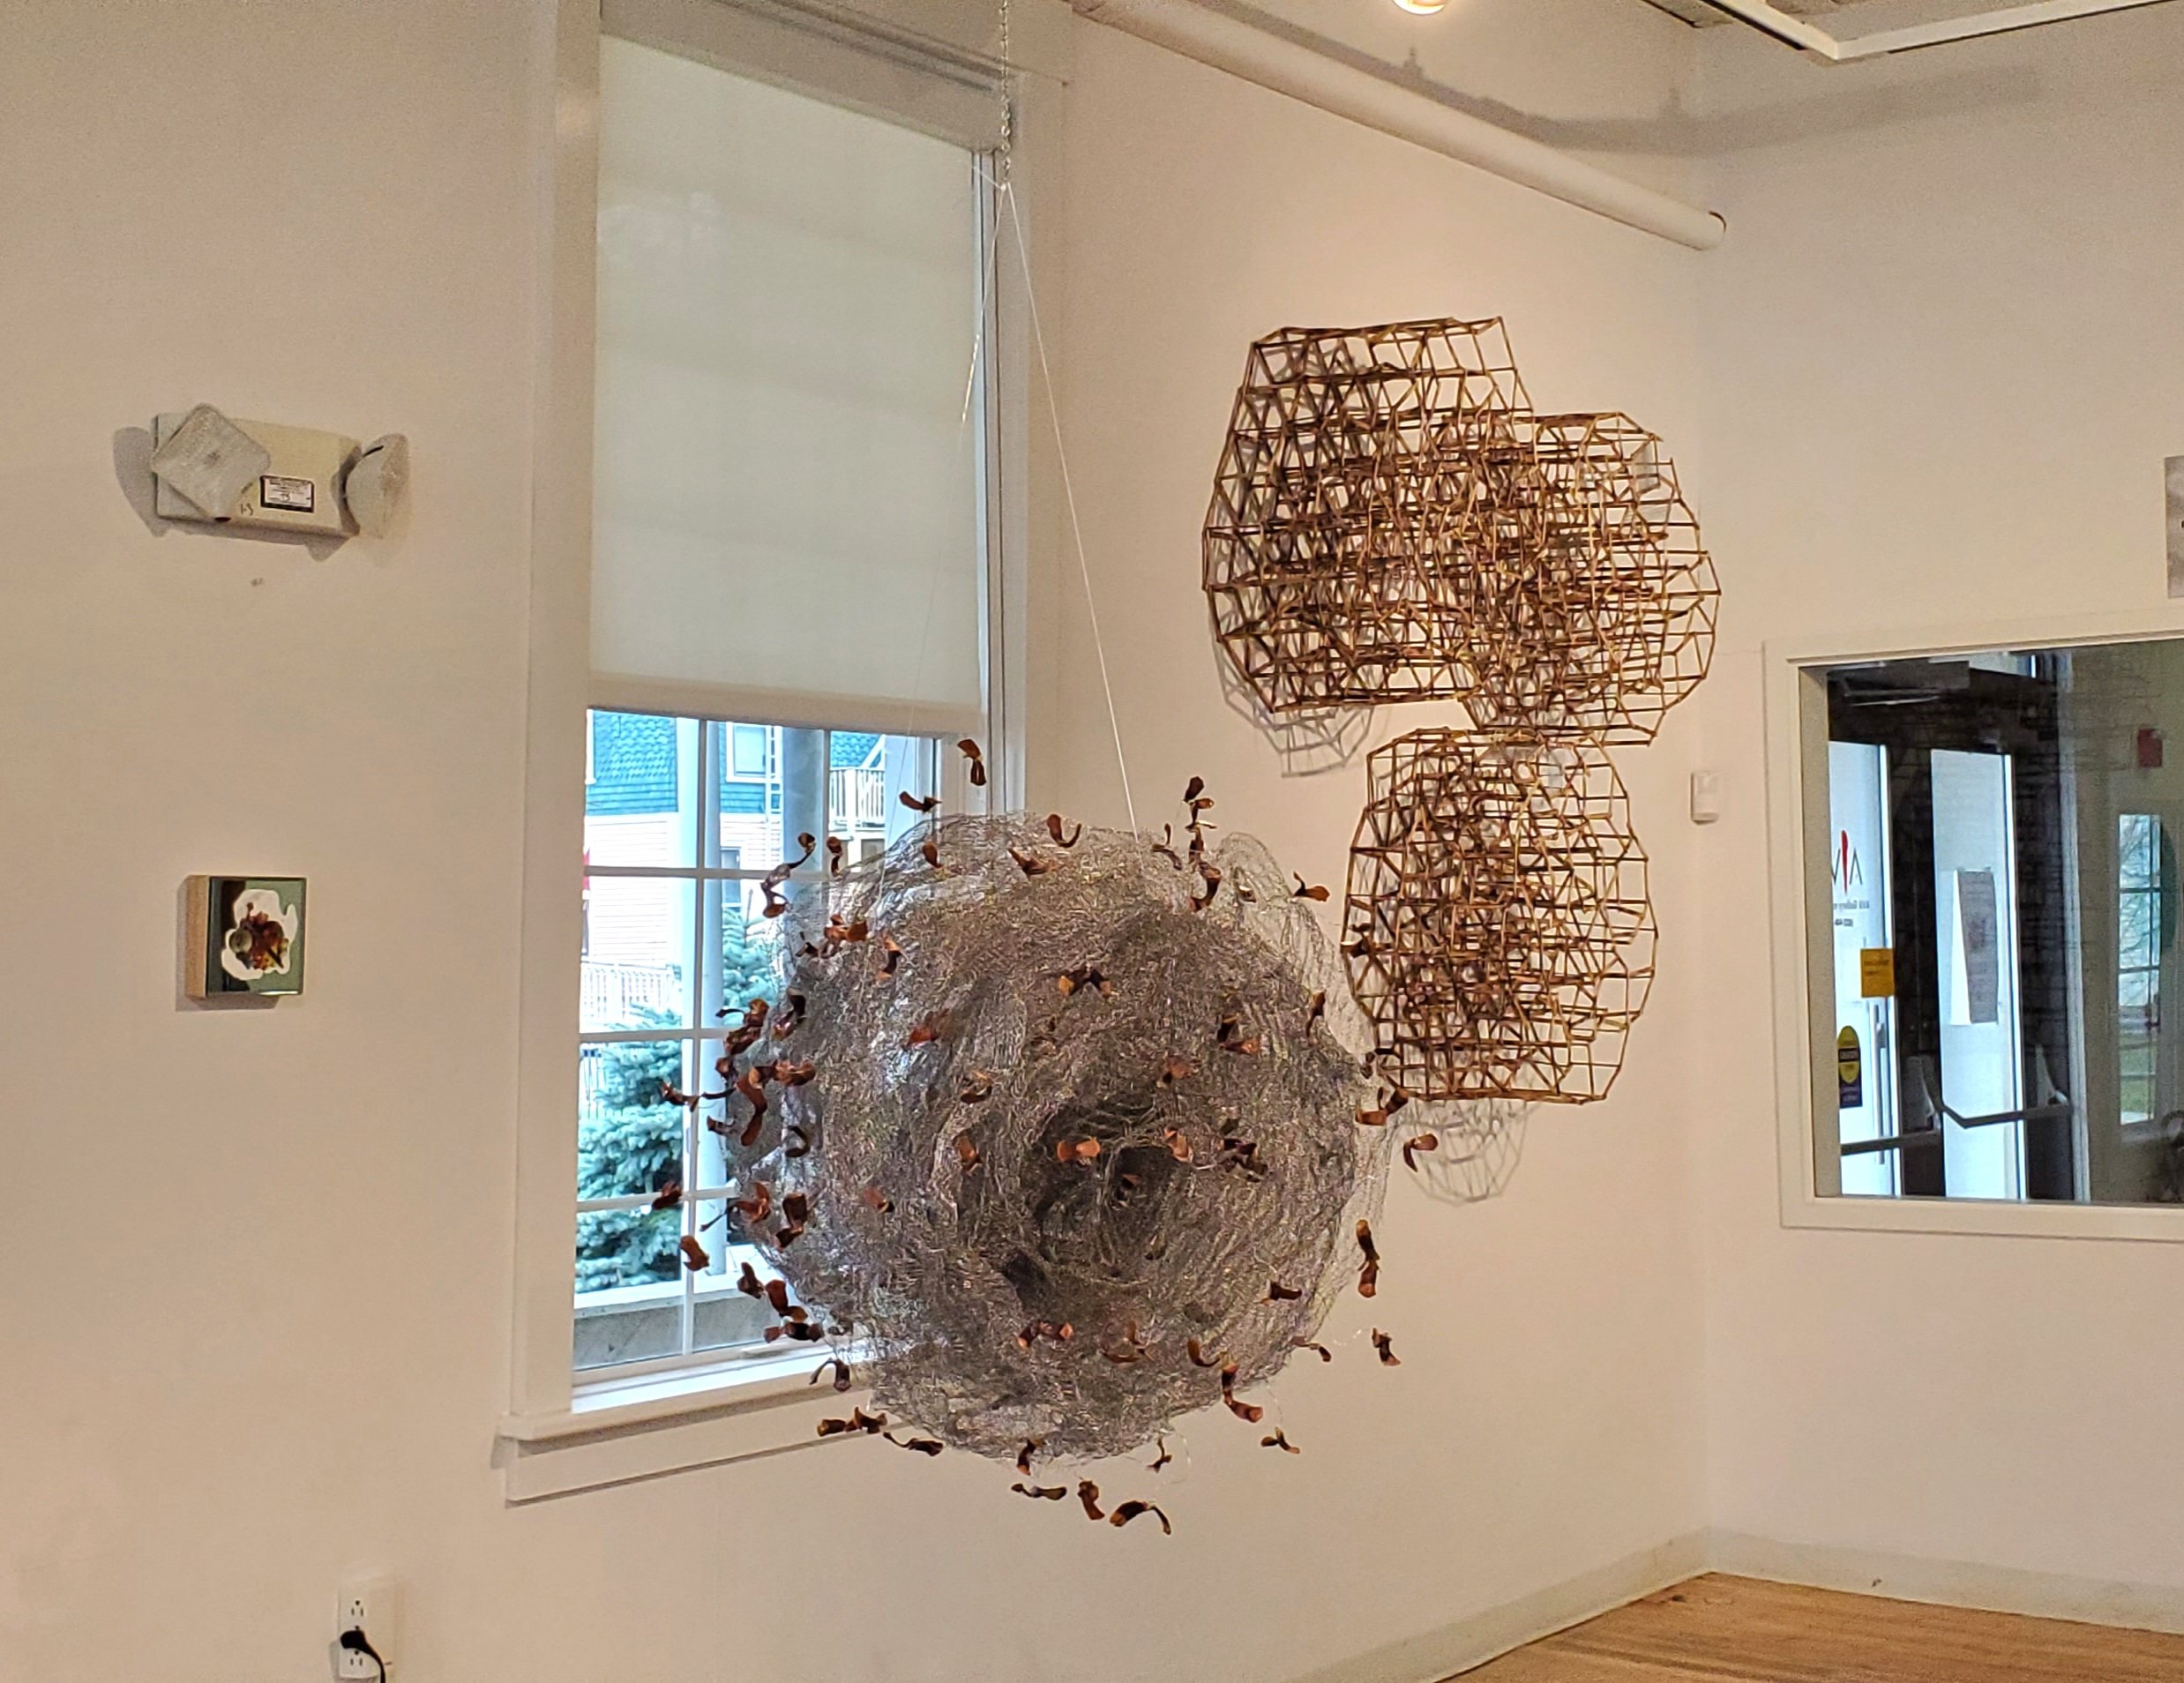 Nest and Geometric Clouds installed at AVA Gallery and Art Center, Lebanon, NH